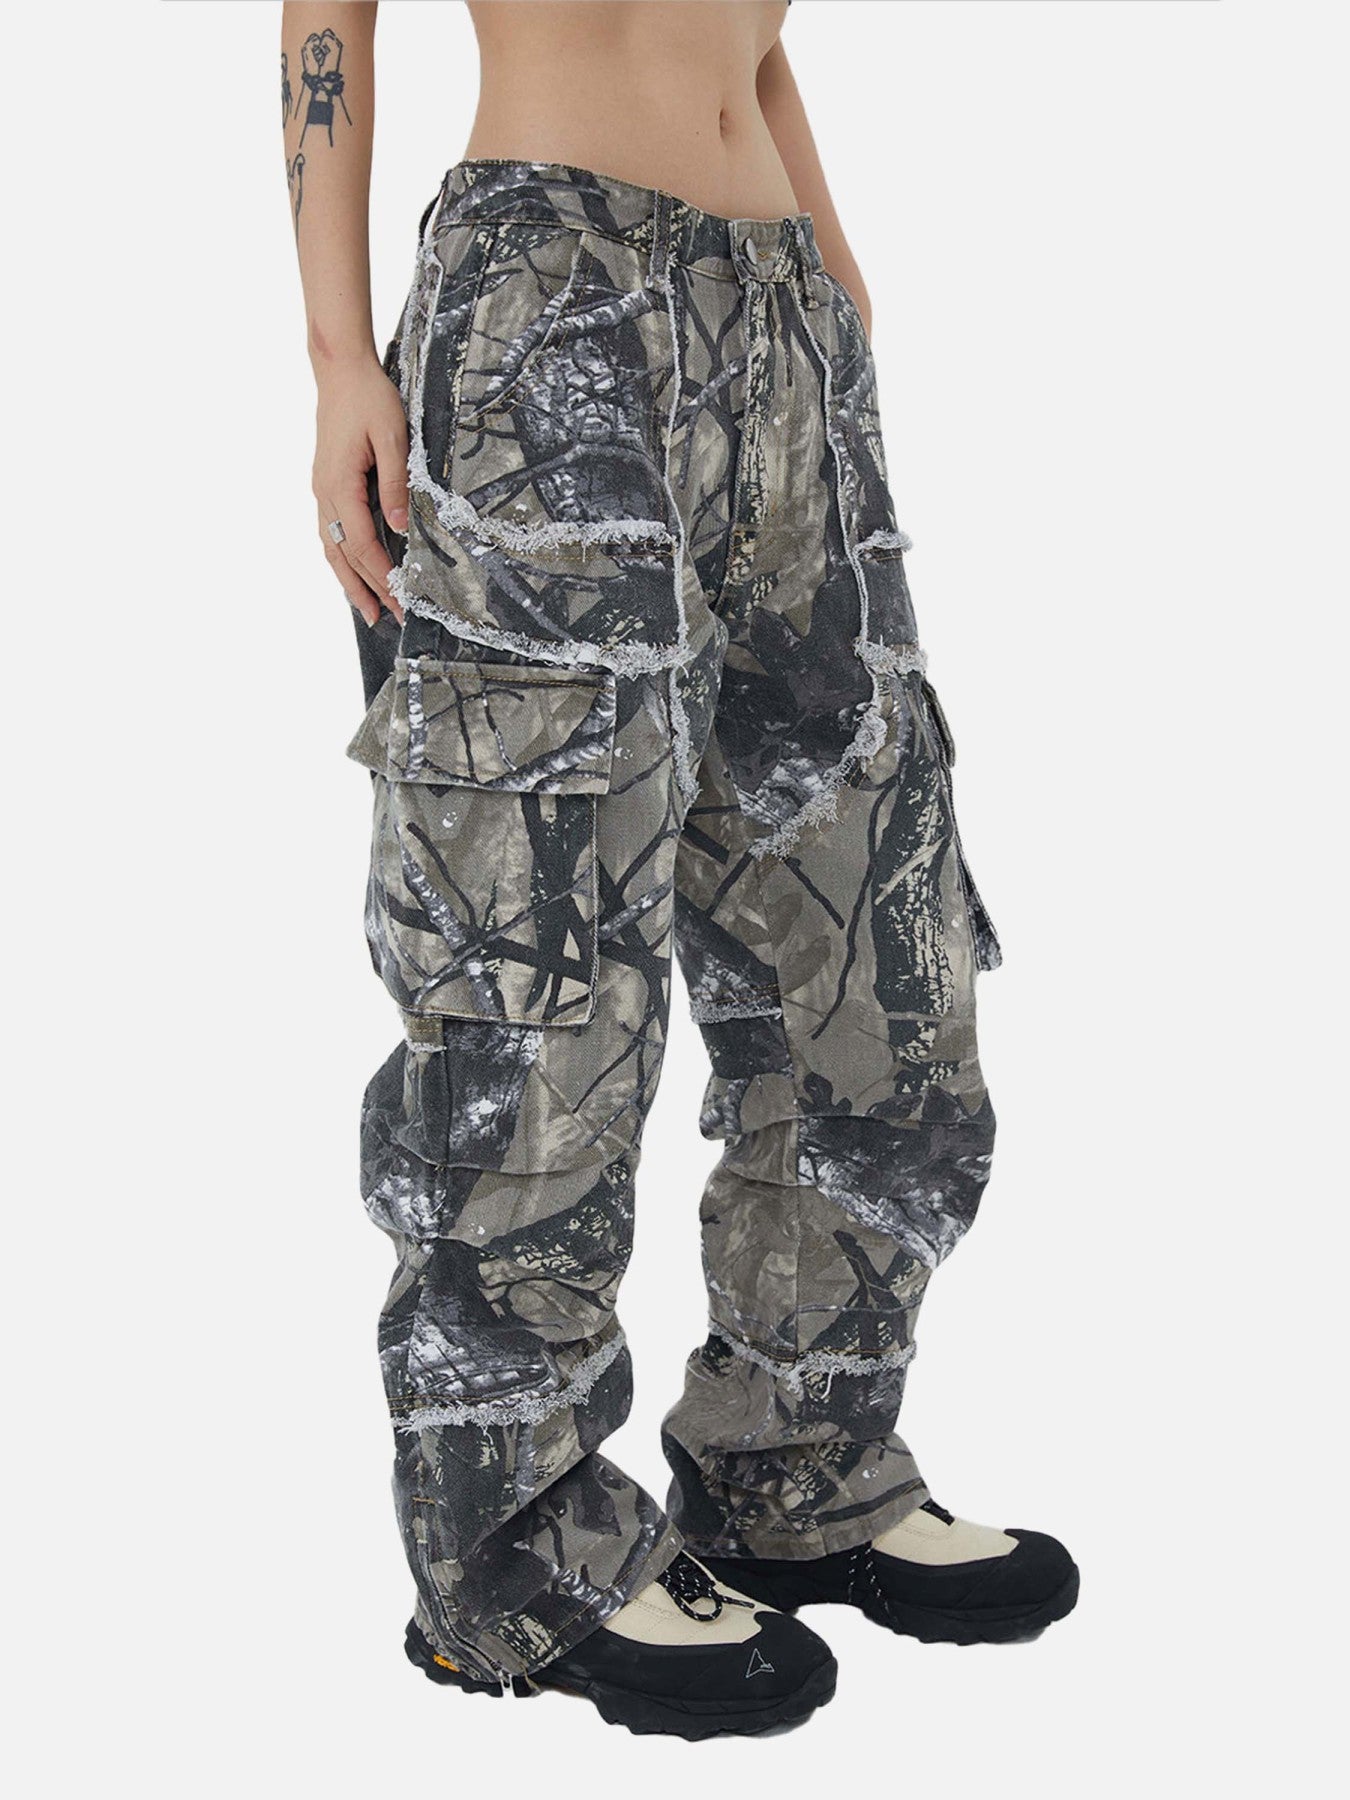 Thesupermade Jungle Camouflage Leaf Loose Fit Straight Leg Pants